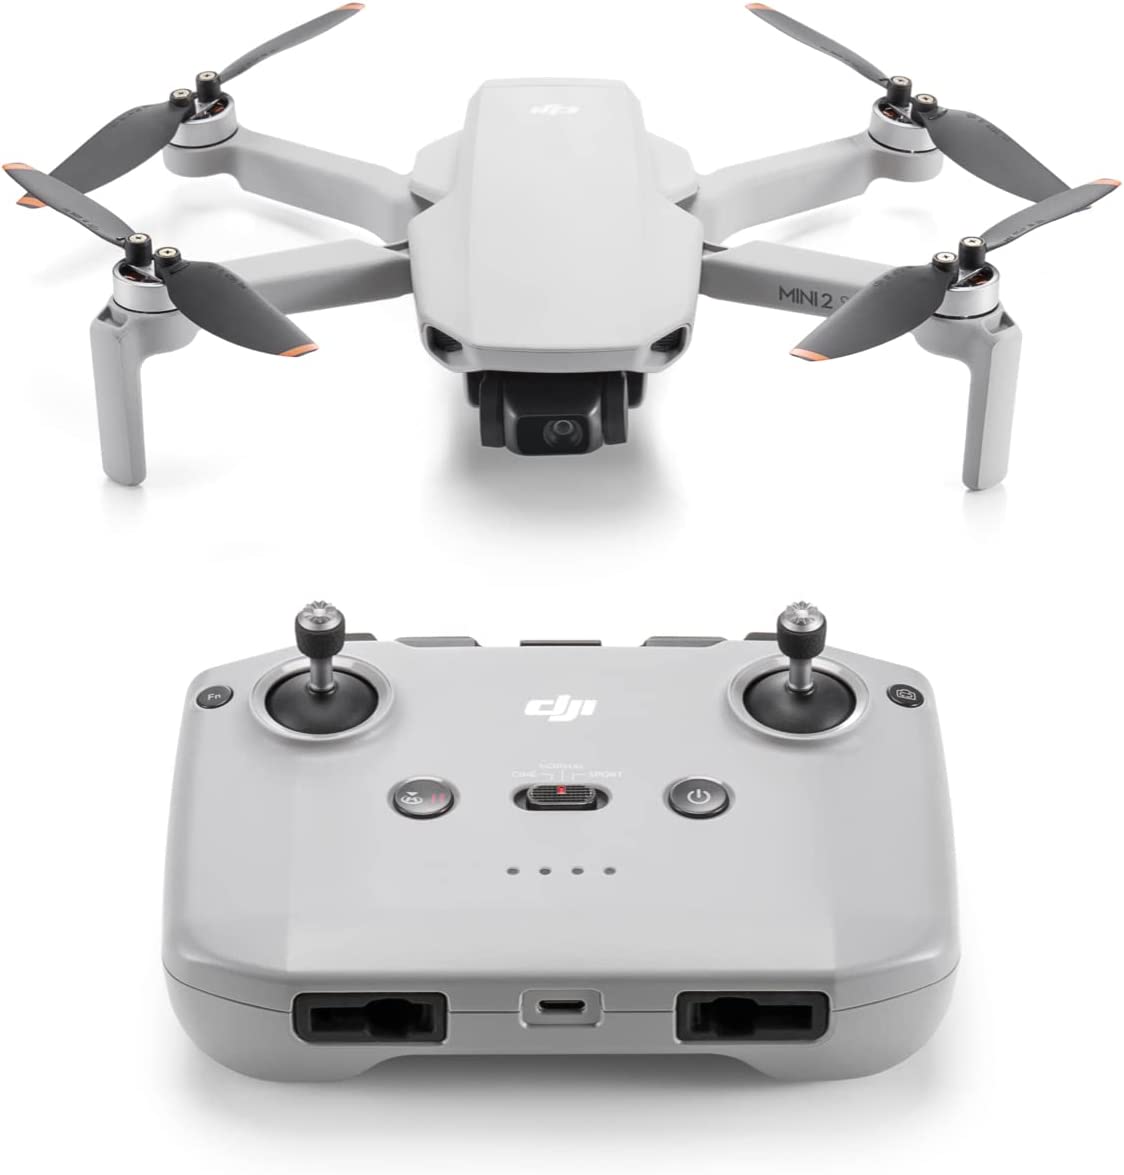 Dji Drone   Mini 2 Se, Foldable Lightweight Mini Drone With Qhd Video, 10km Video Transmission, 31 Min Flight Time, Under 249 G, Return To Home, Automatic Pro Shots, Drone With Camera For Beginners